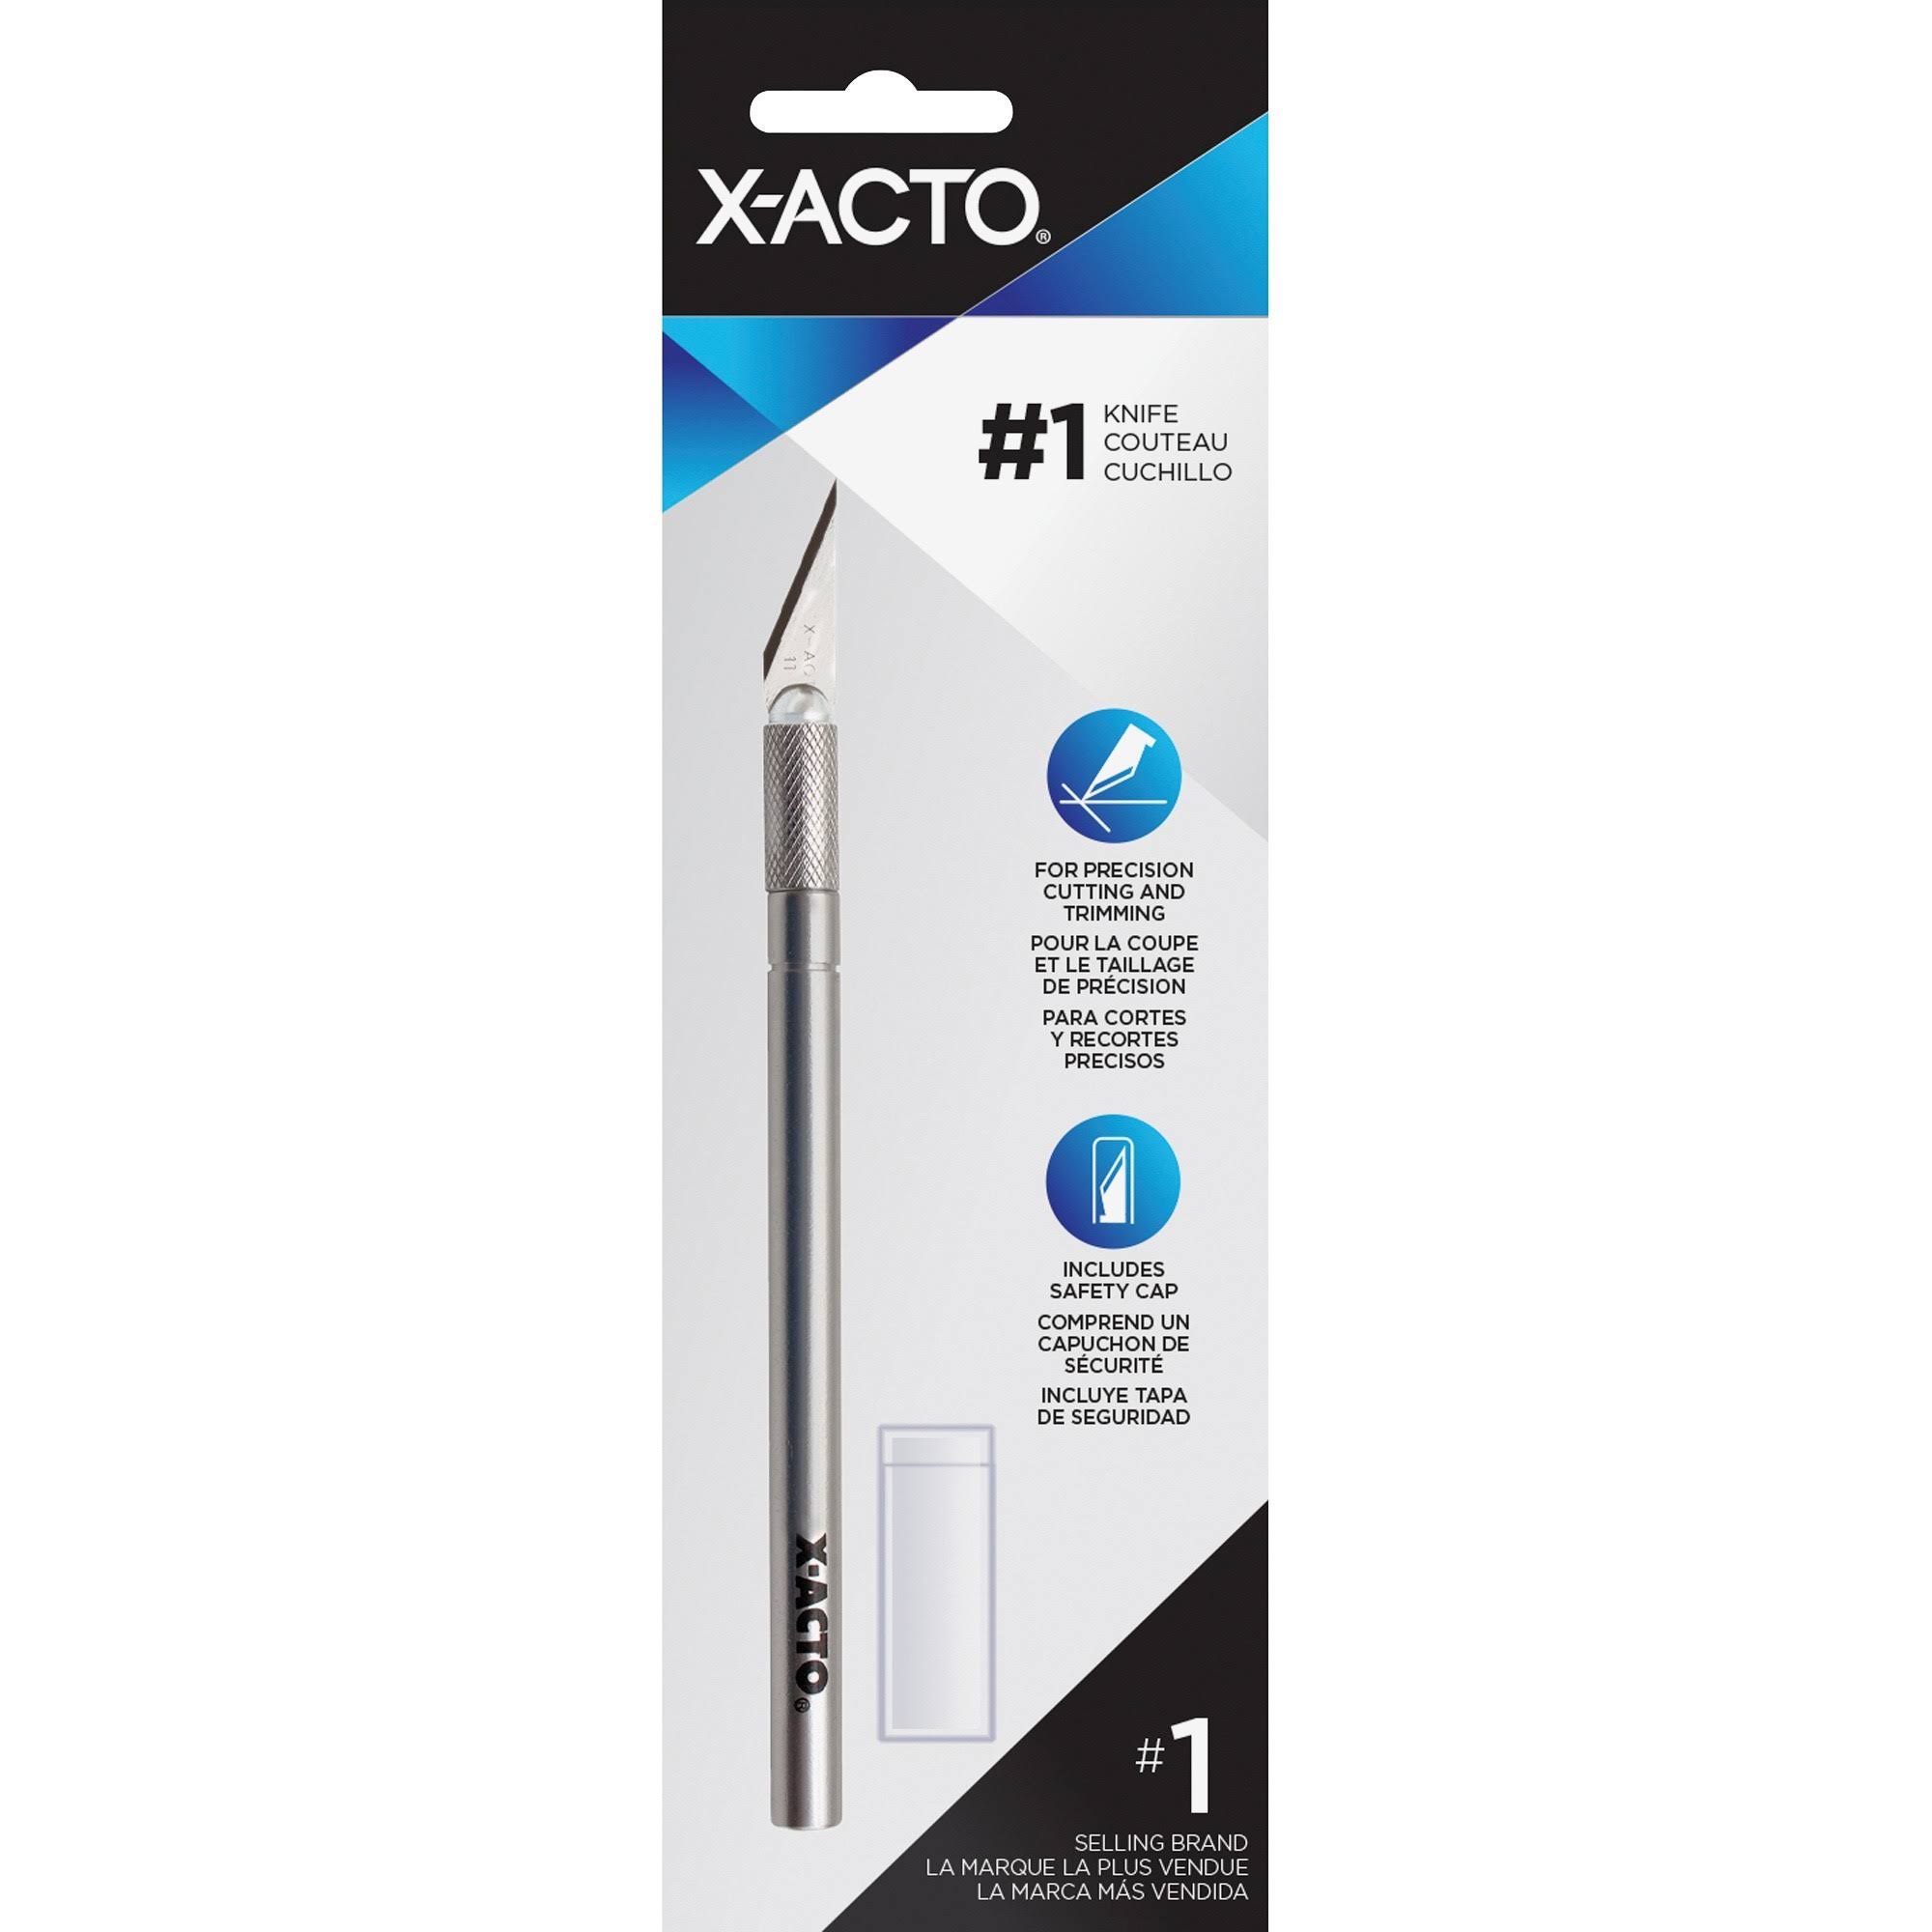 Xacto Precision Knife - #1, with Safety Cap